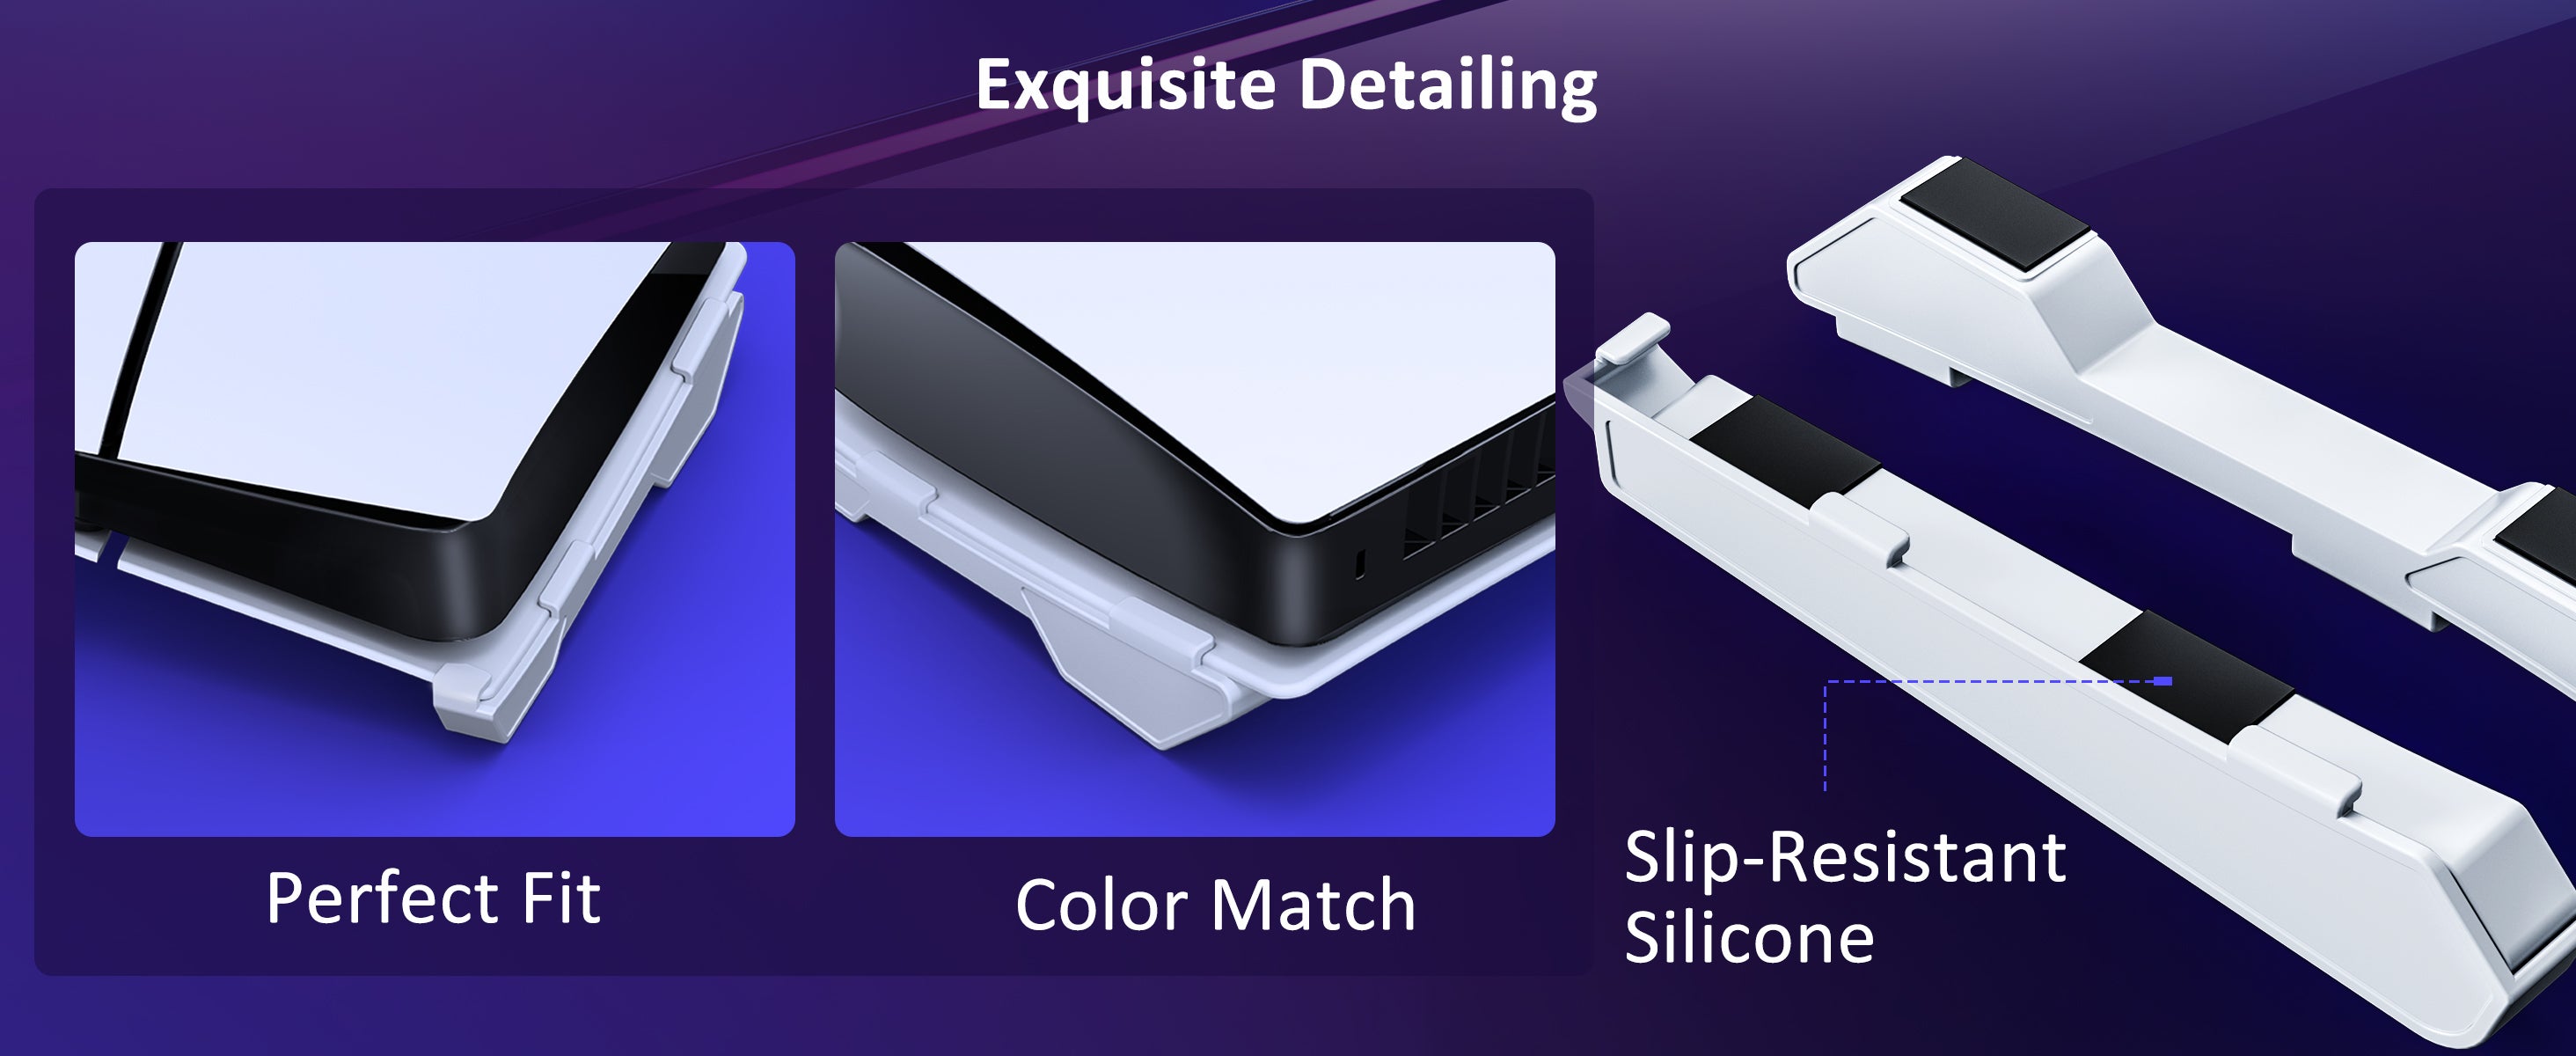 Detail showcasing the perfect fit of the horizontal stand with the PS5 Slim console, which includes a silicone pad.